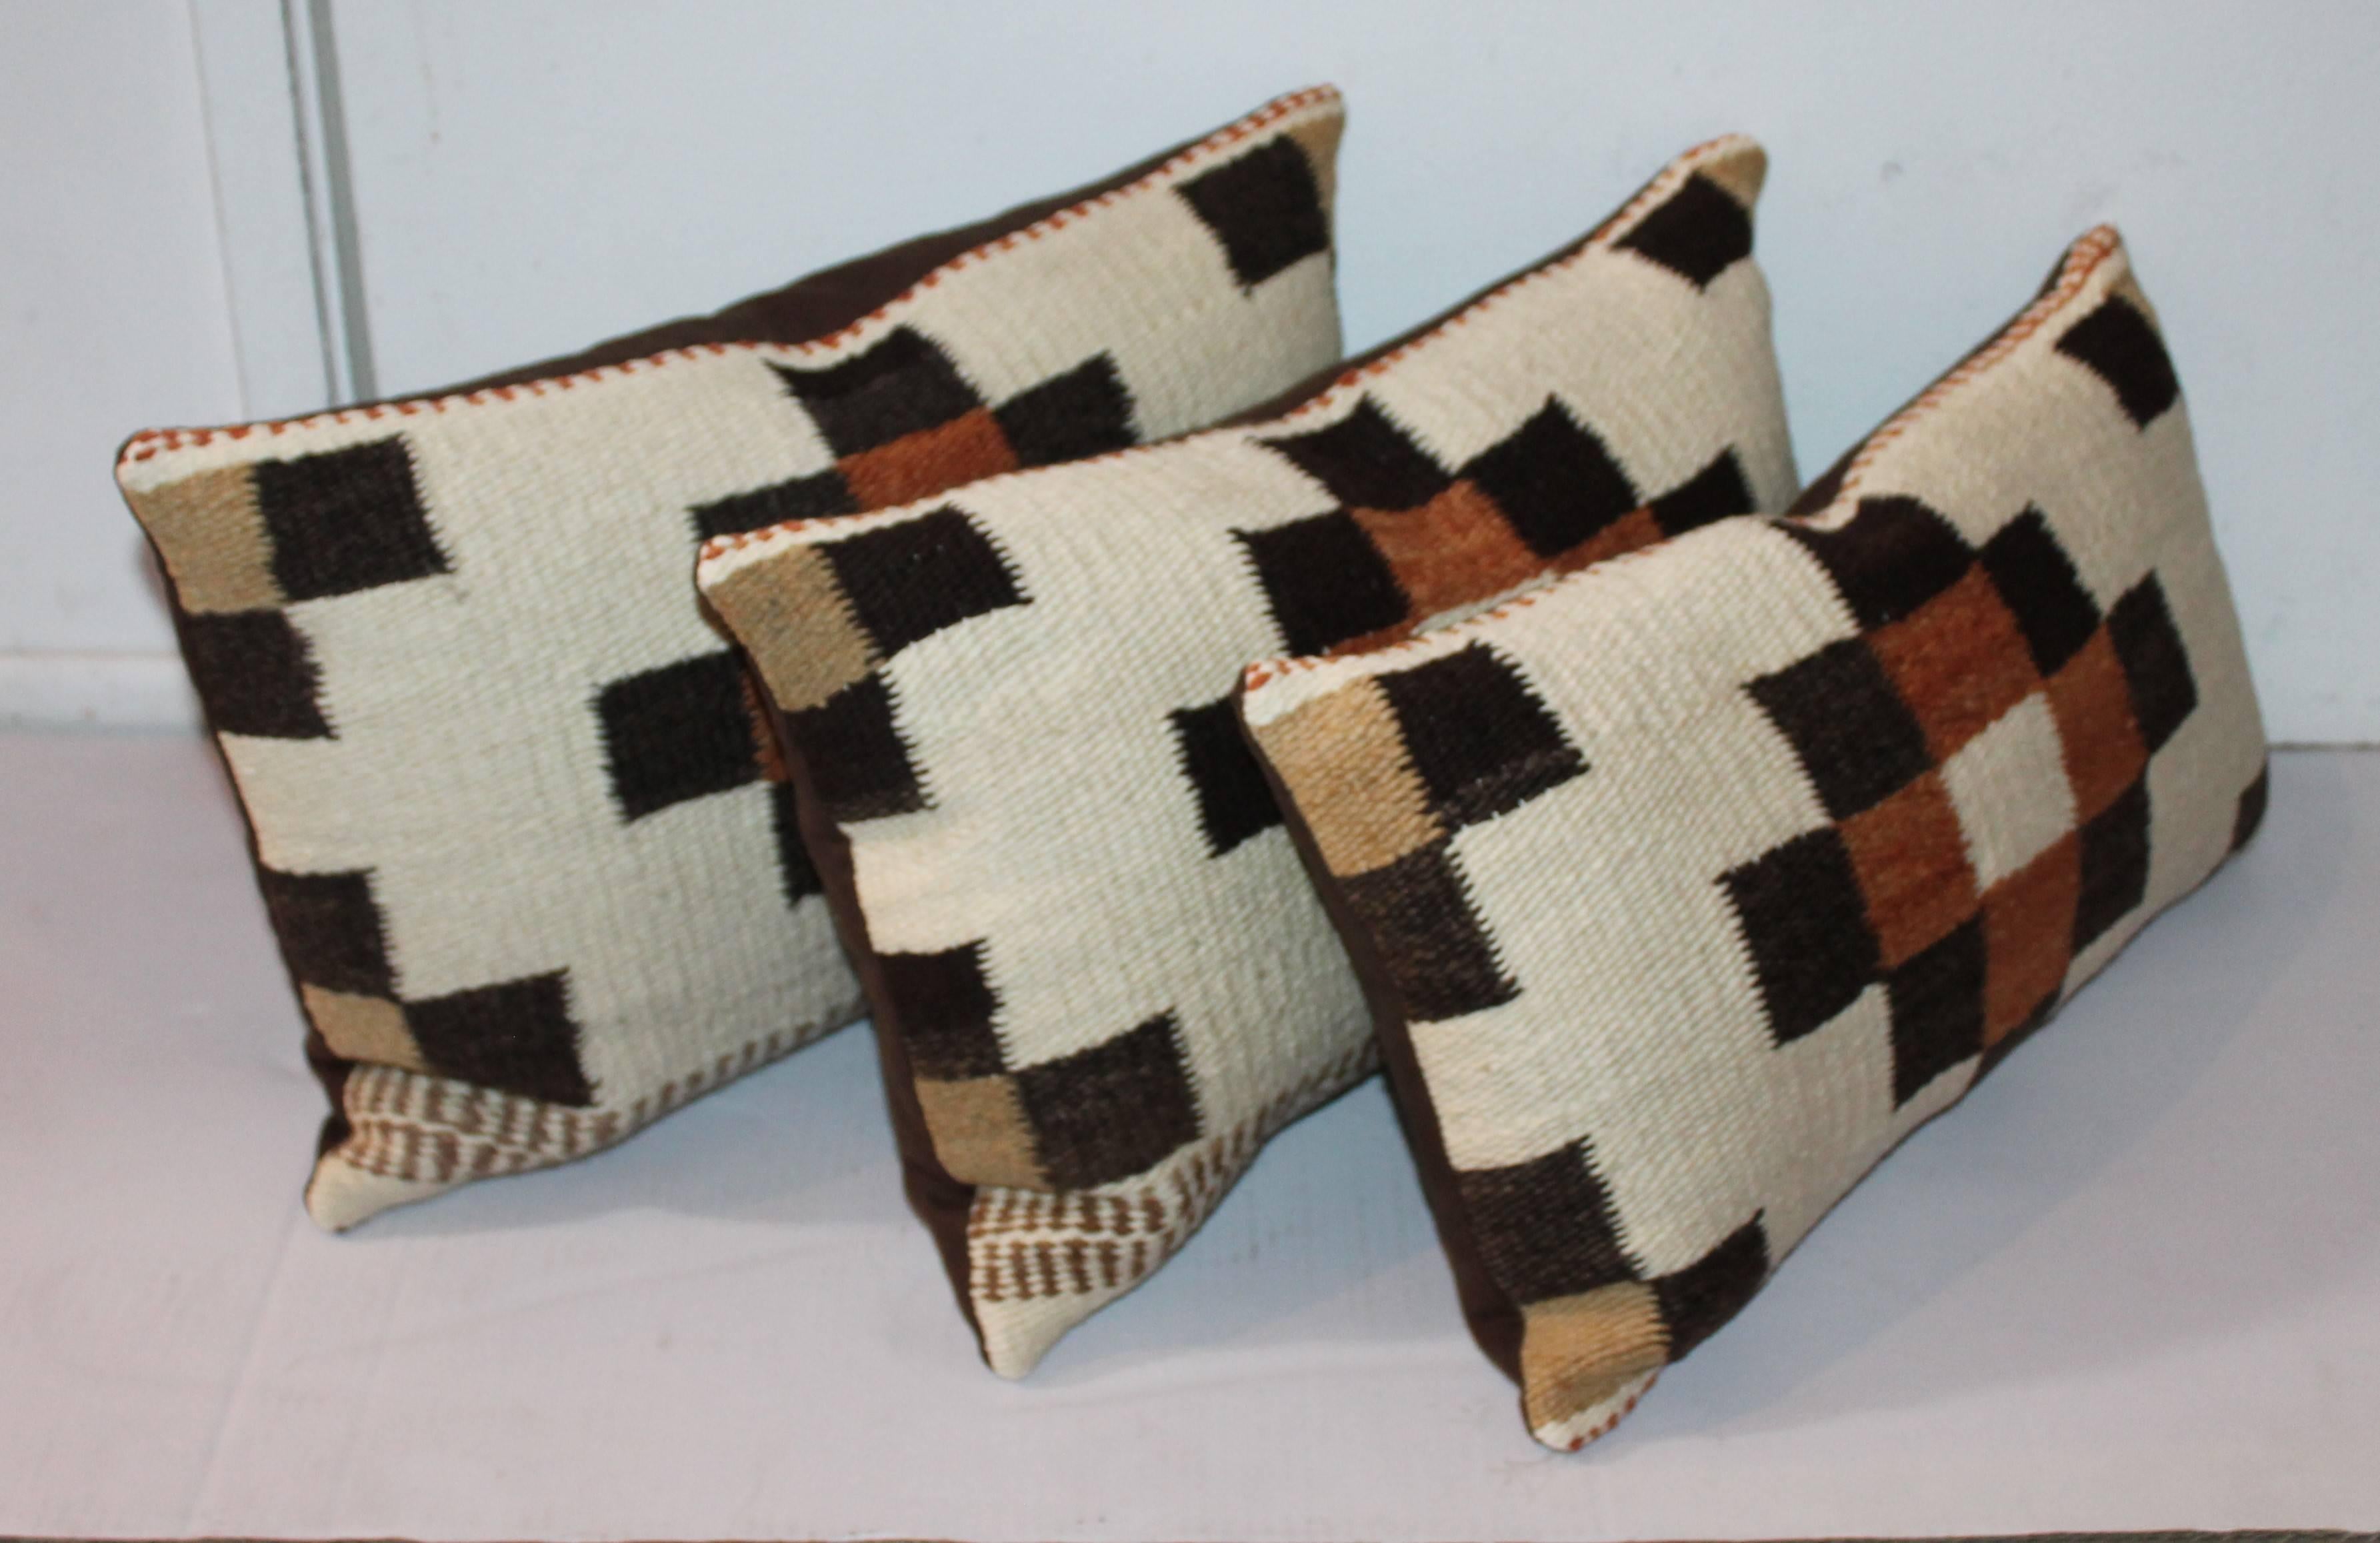 These pillows are from a Navajo Saddle blanket. The two larger pillows are 19 x 12 and the smaller pillow is 19 x 10. Selling as a group or 895. Each individually. The condition are pristine.